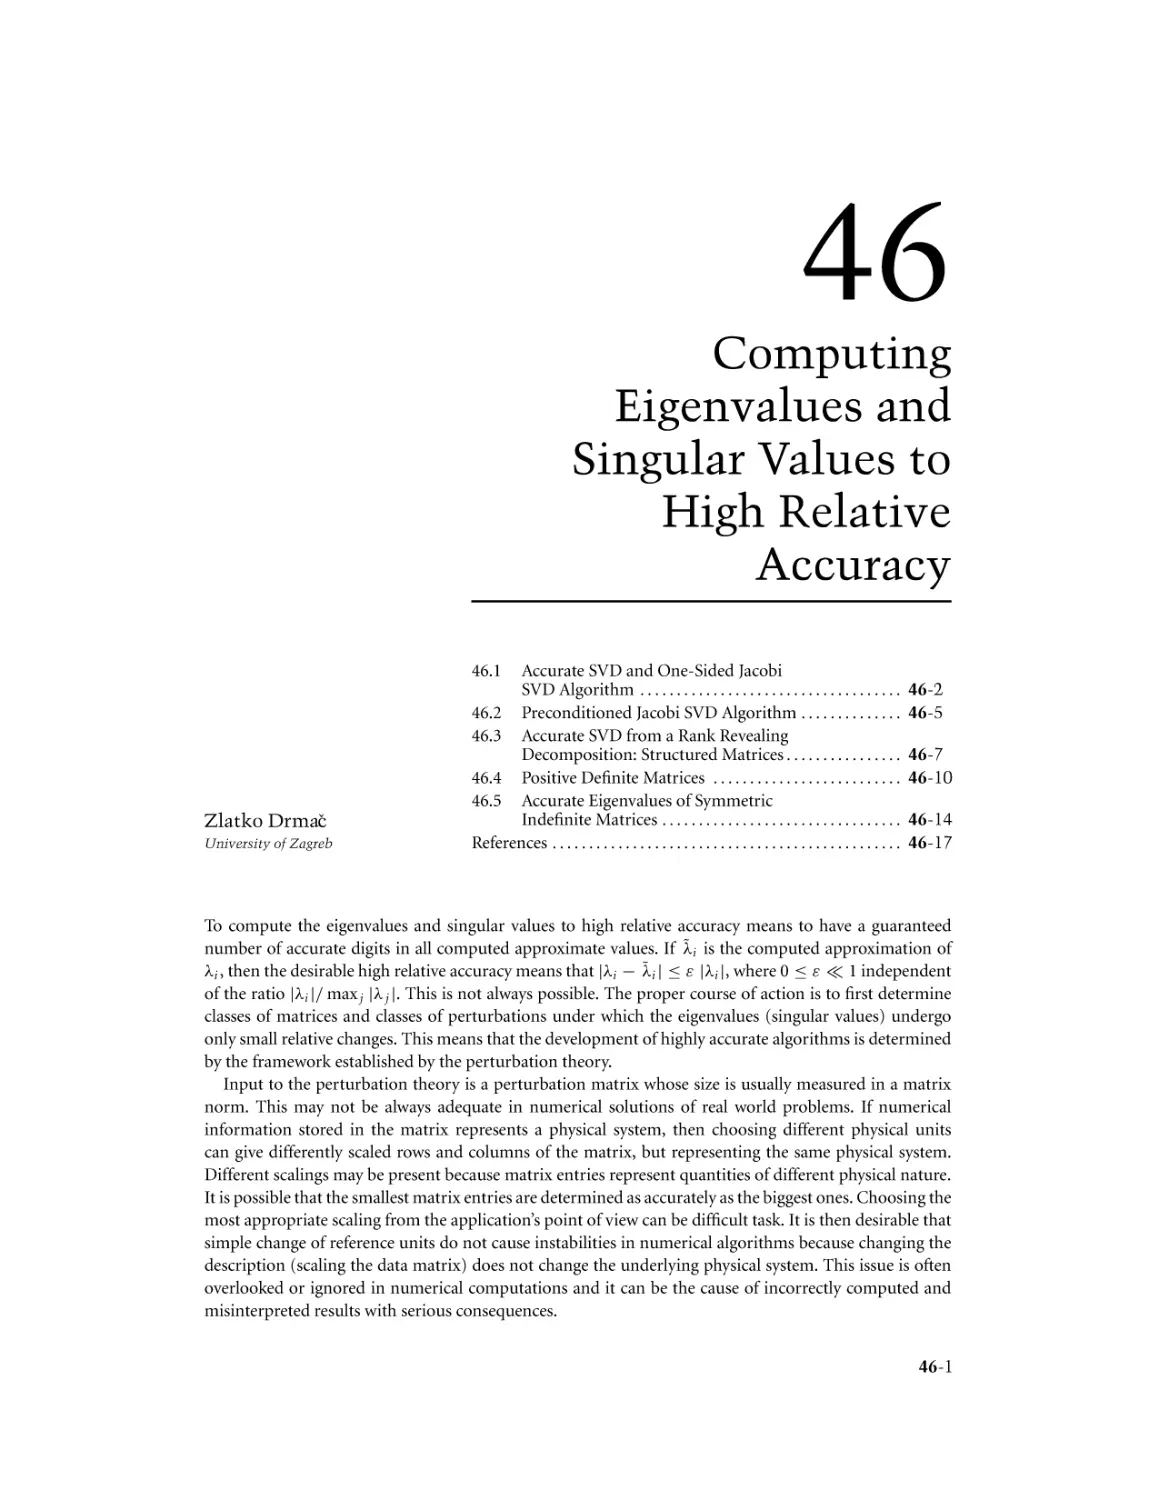 Chapter 46. Computing Eigenvalues and Singular Values to High Relative Accuracy